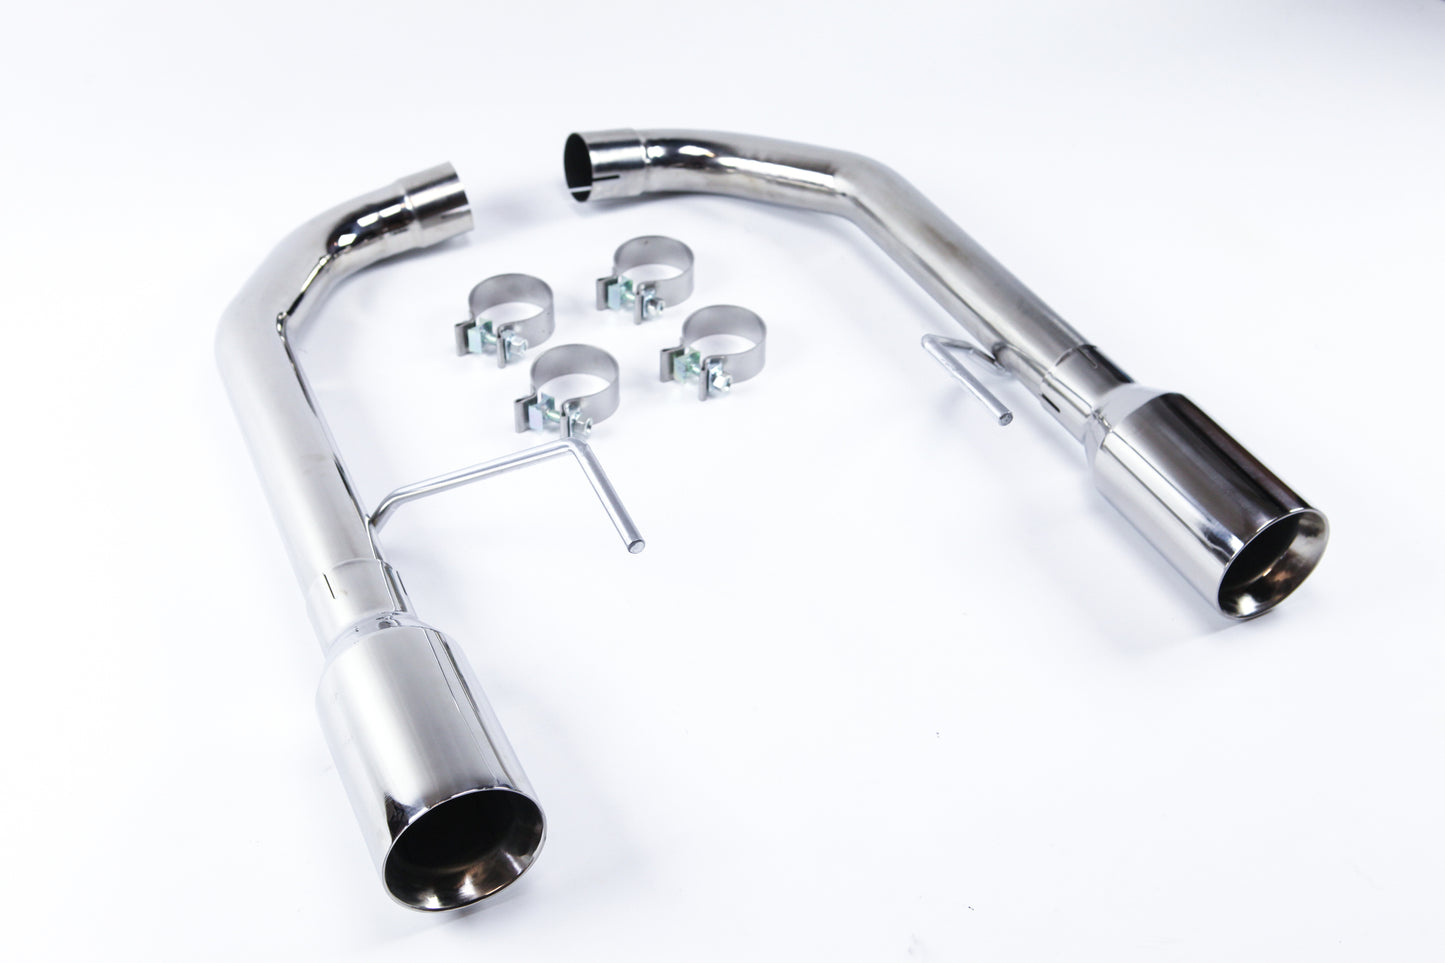 Ford Mustang GT 15-17 Exhaust Muffler Delete 4" Tips V8 5.0L Angle Tips